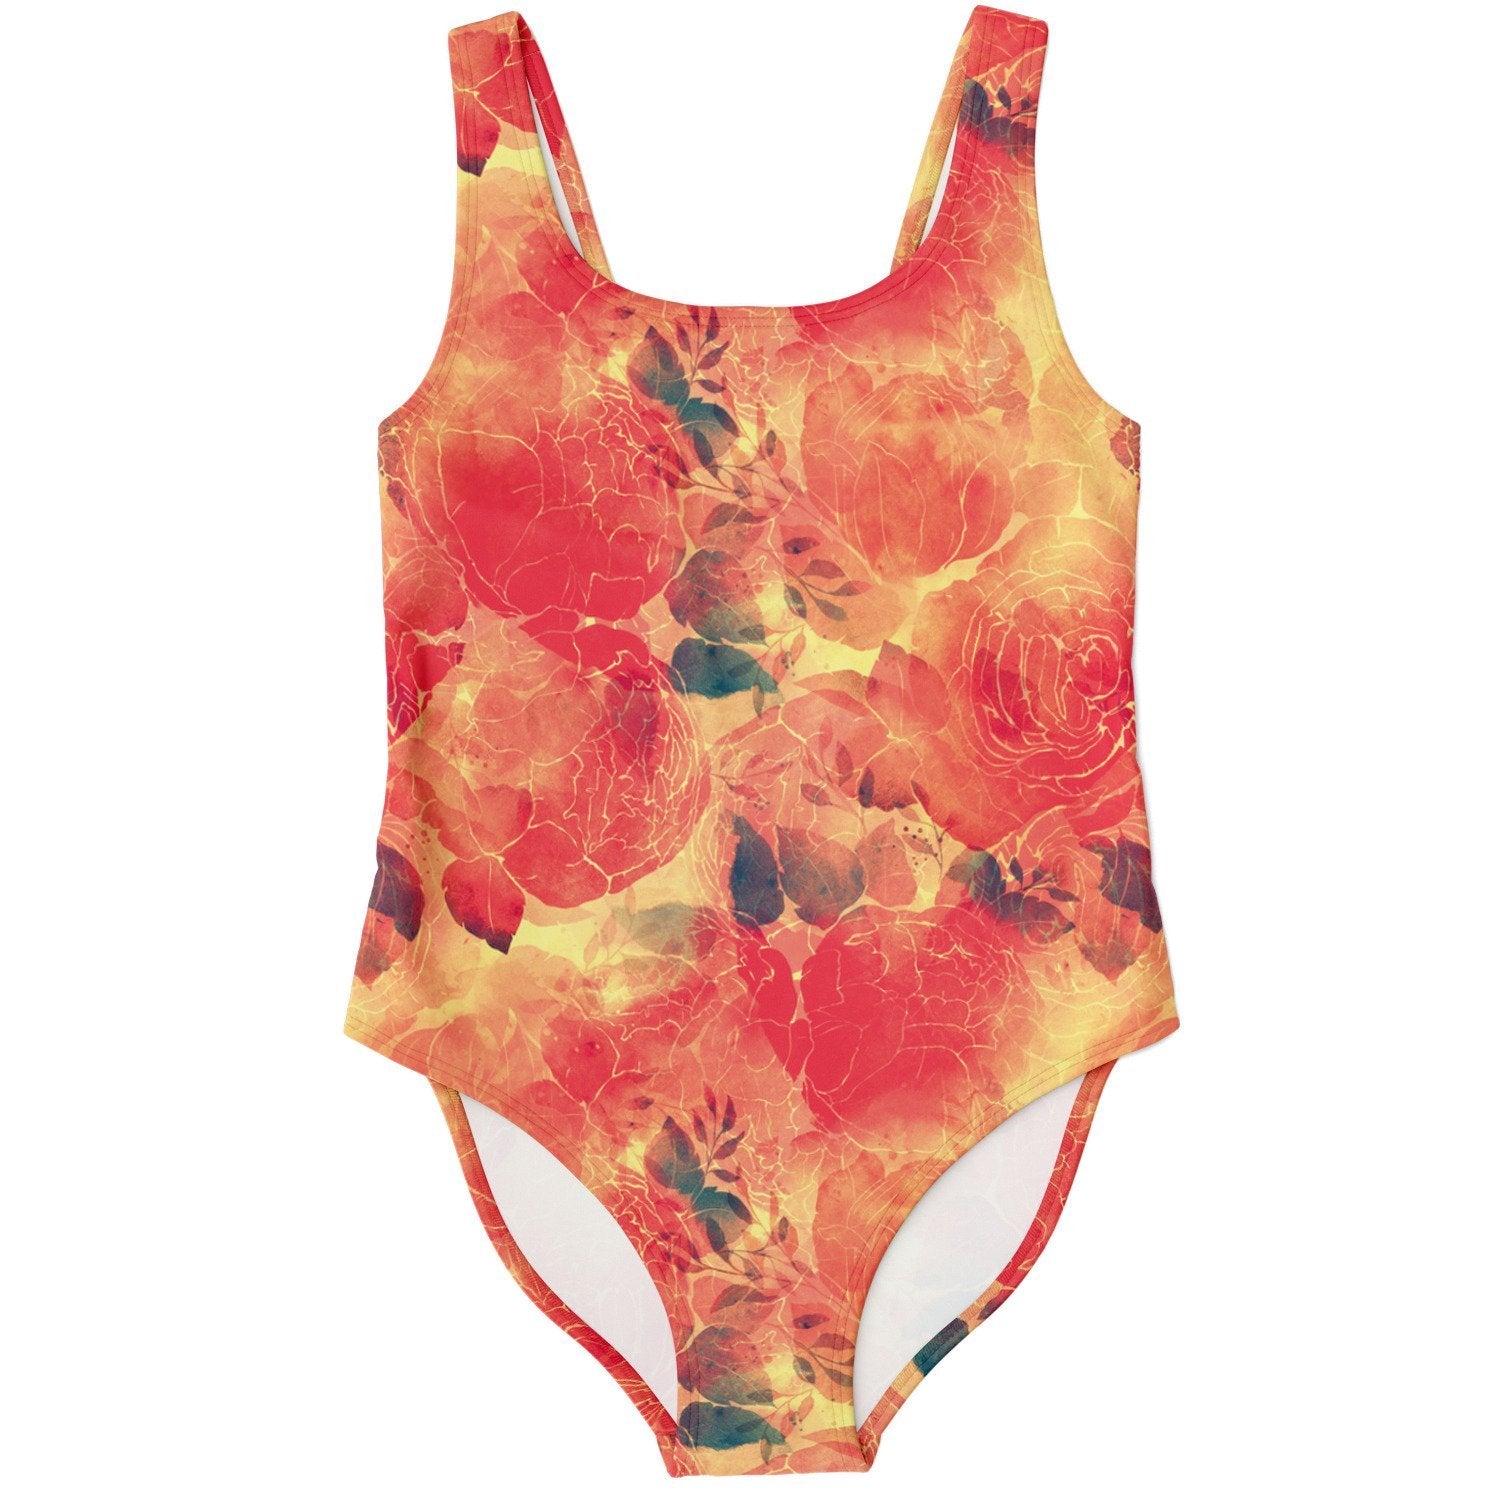 Shabby Chic Rose Pattern One Piece Swimsuit - kayzers